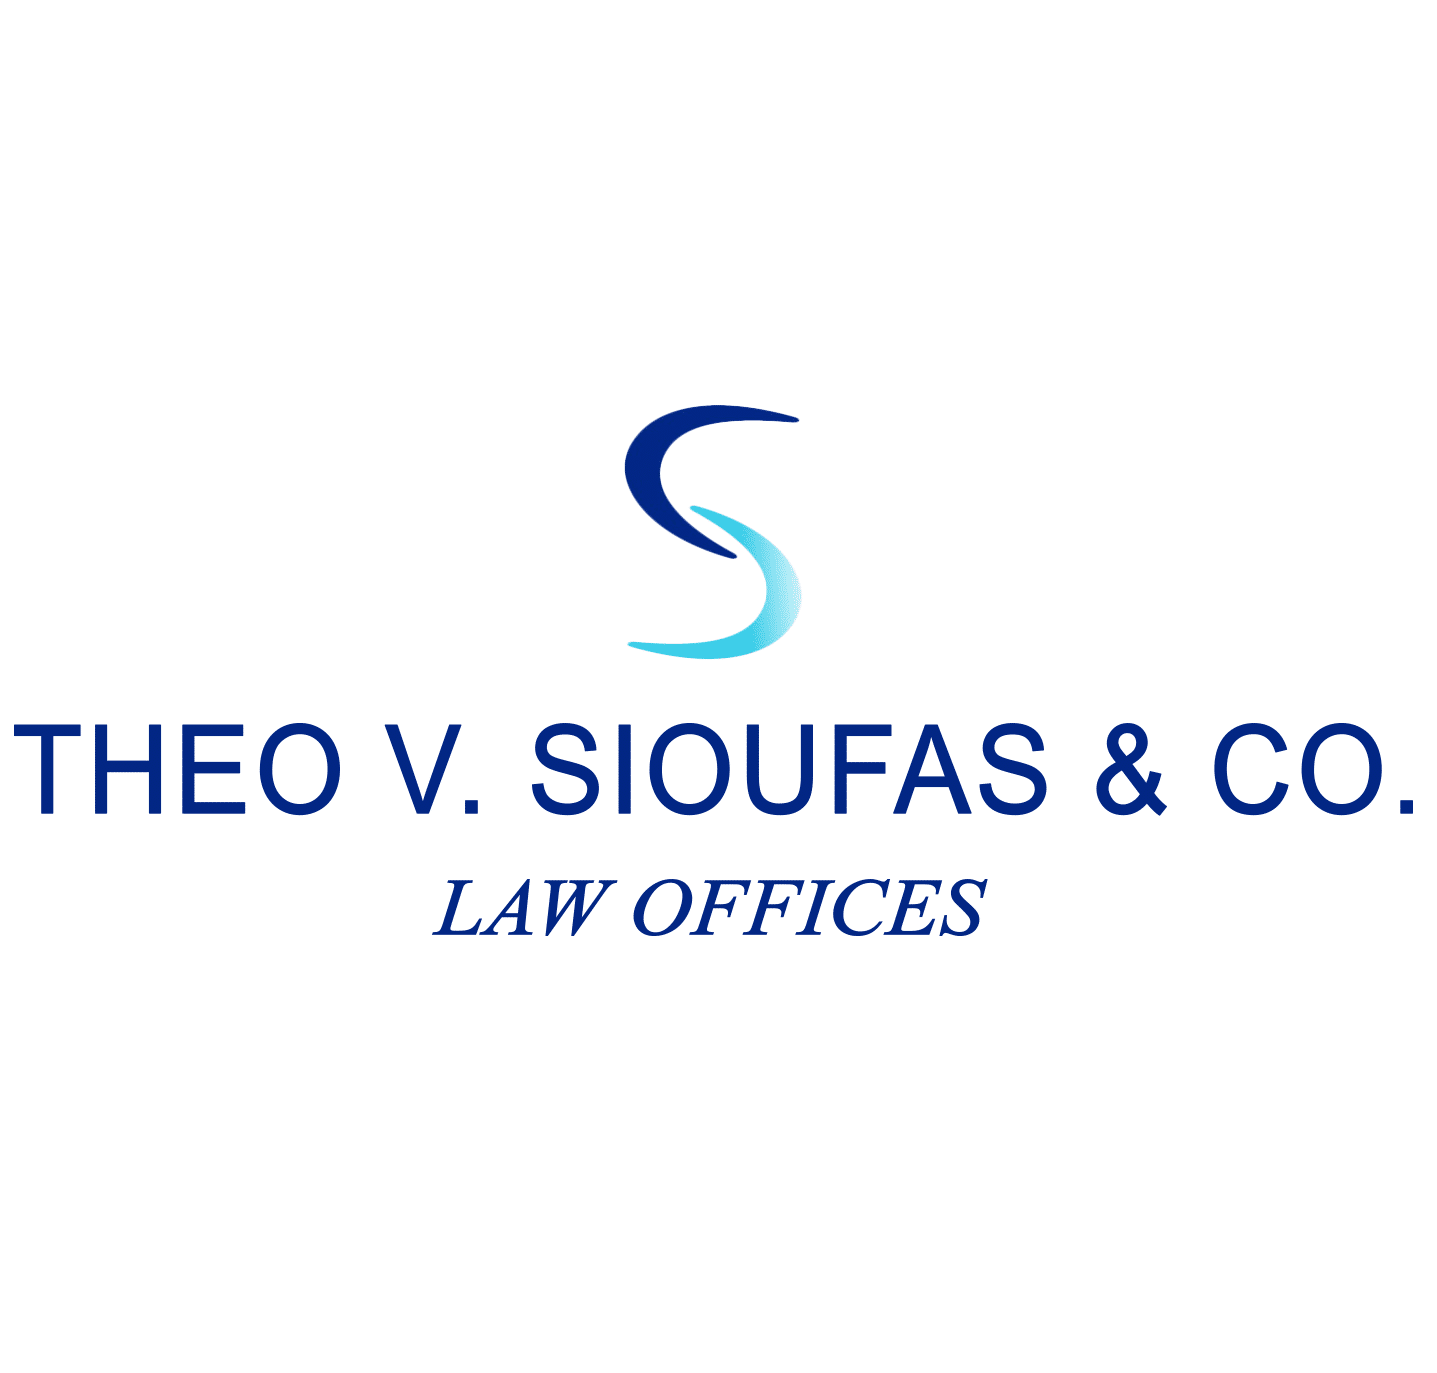 THEO V. SIOUFAS & CO. LAW OFFICES